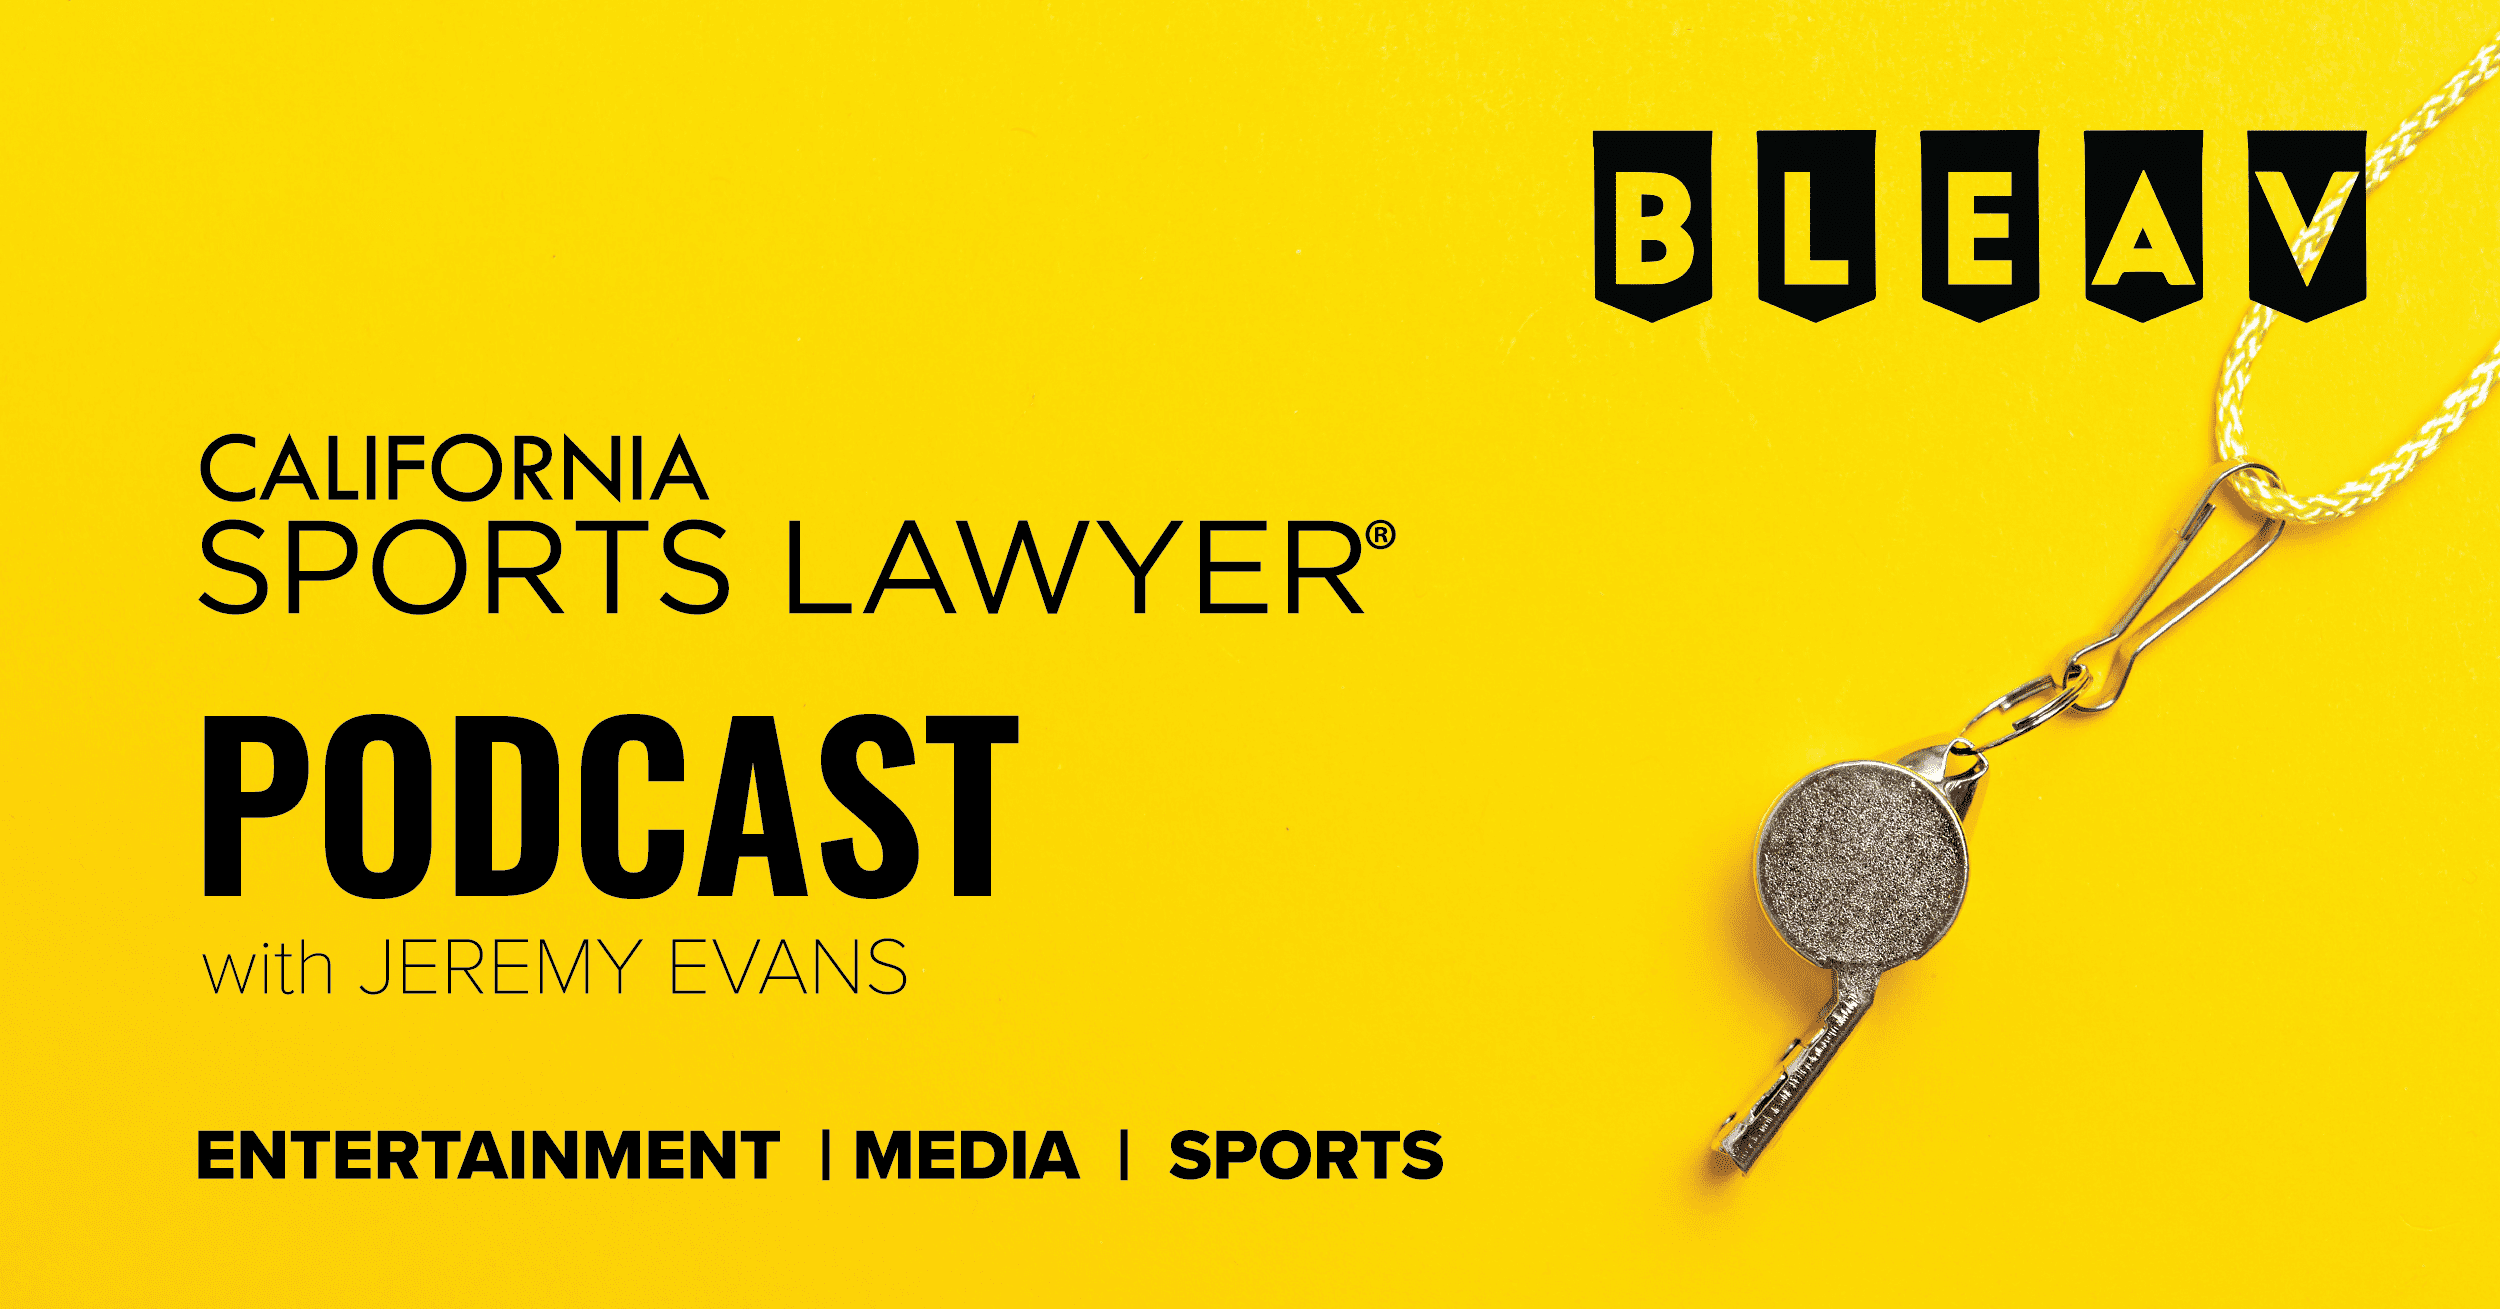 California Sports Lawyer® Podcast with Jeremy Evans: The Plan to Save College Sports